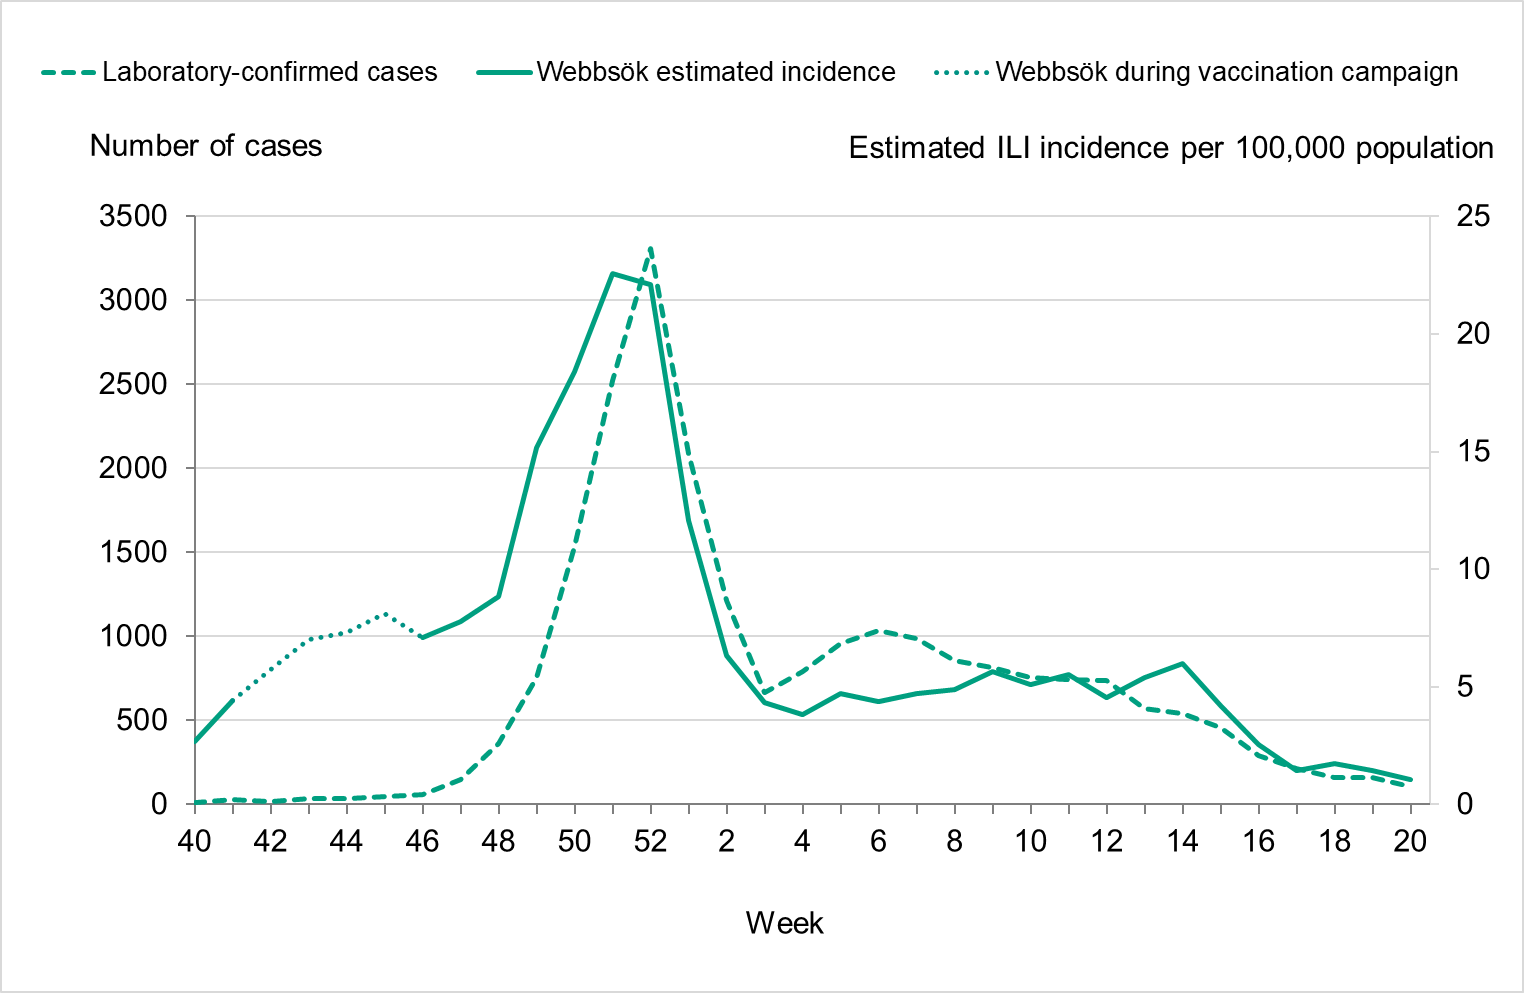 Webbsök rises one week before cases and has a two-week peak. Cases peak the second of these weeks. After the peak, both indicators drop to lower levels. 